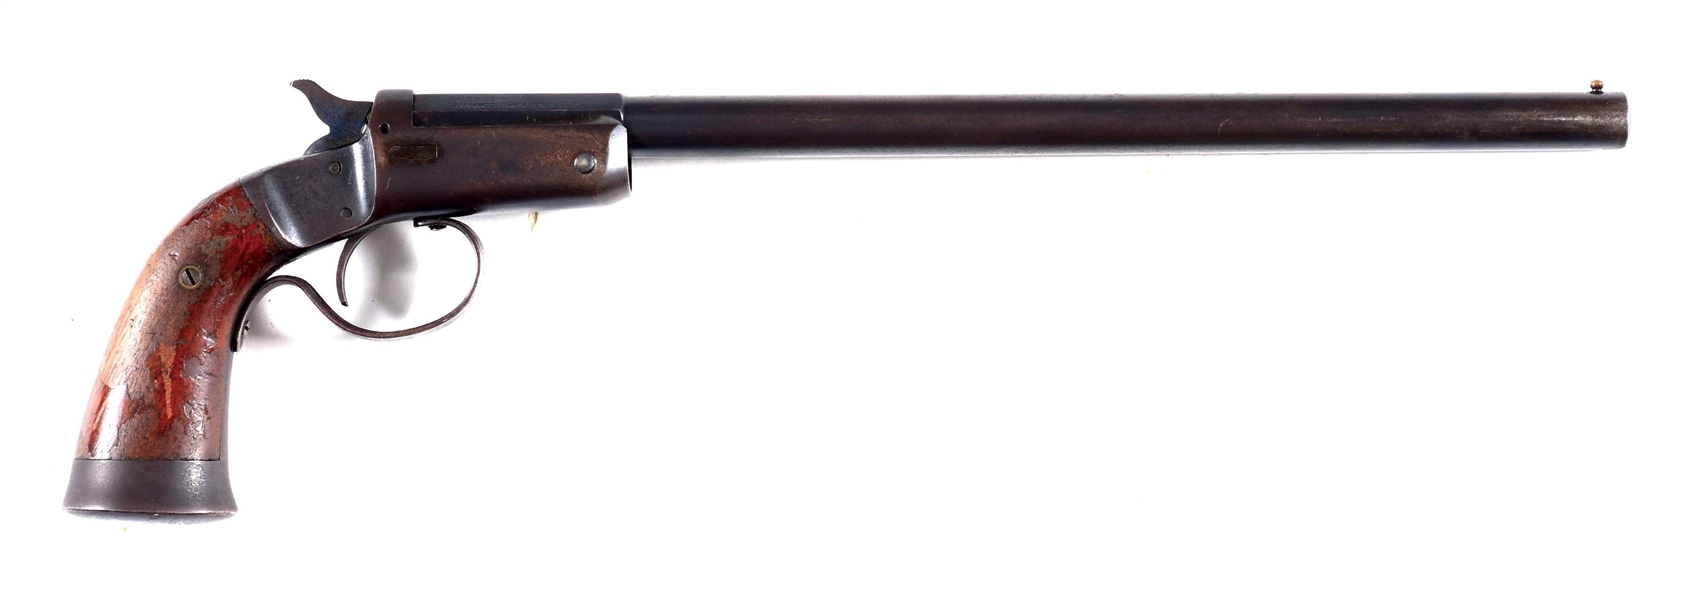 (N) STEVENS NO. 35 OFF HAND .410 PISTOL (ANY OTHER WEAPON).